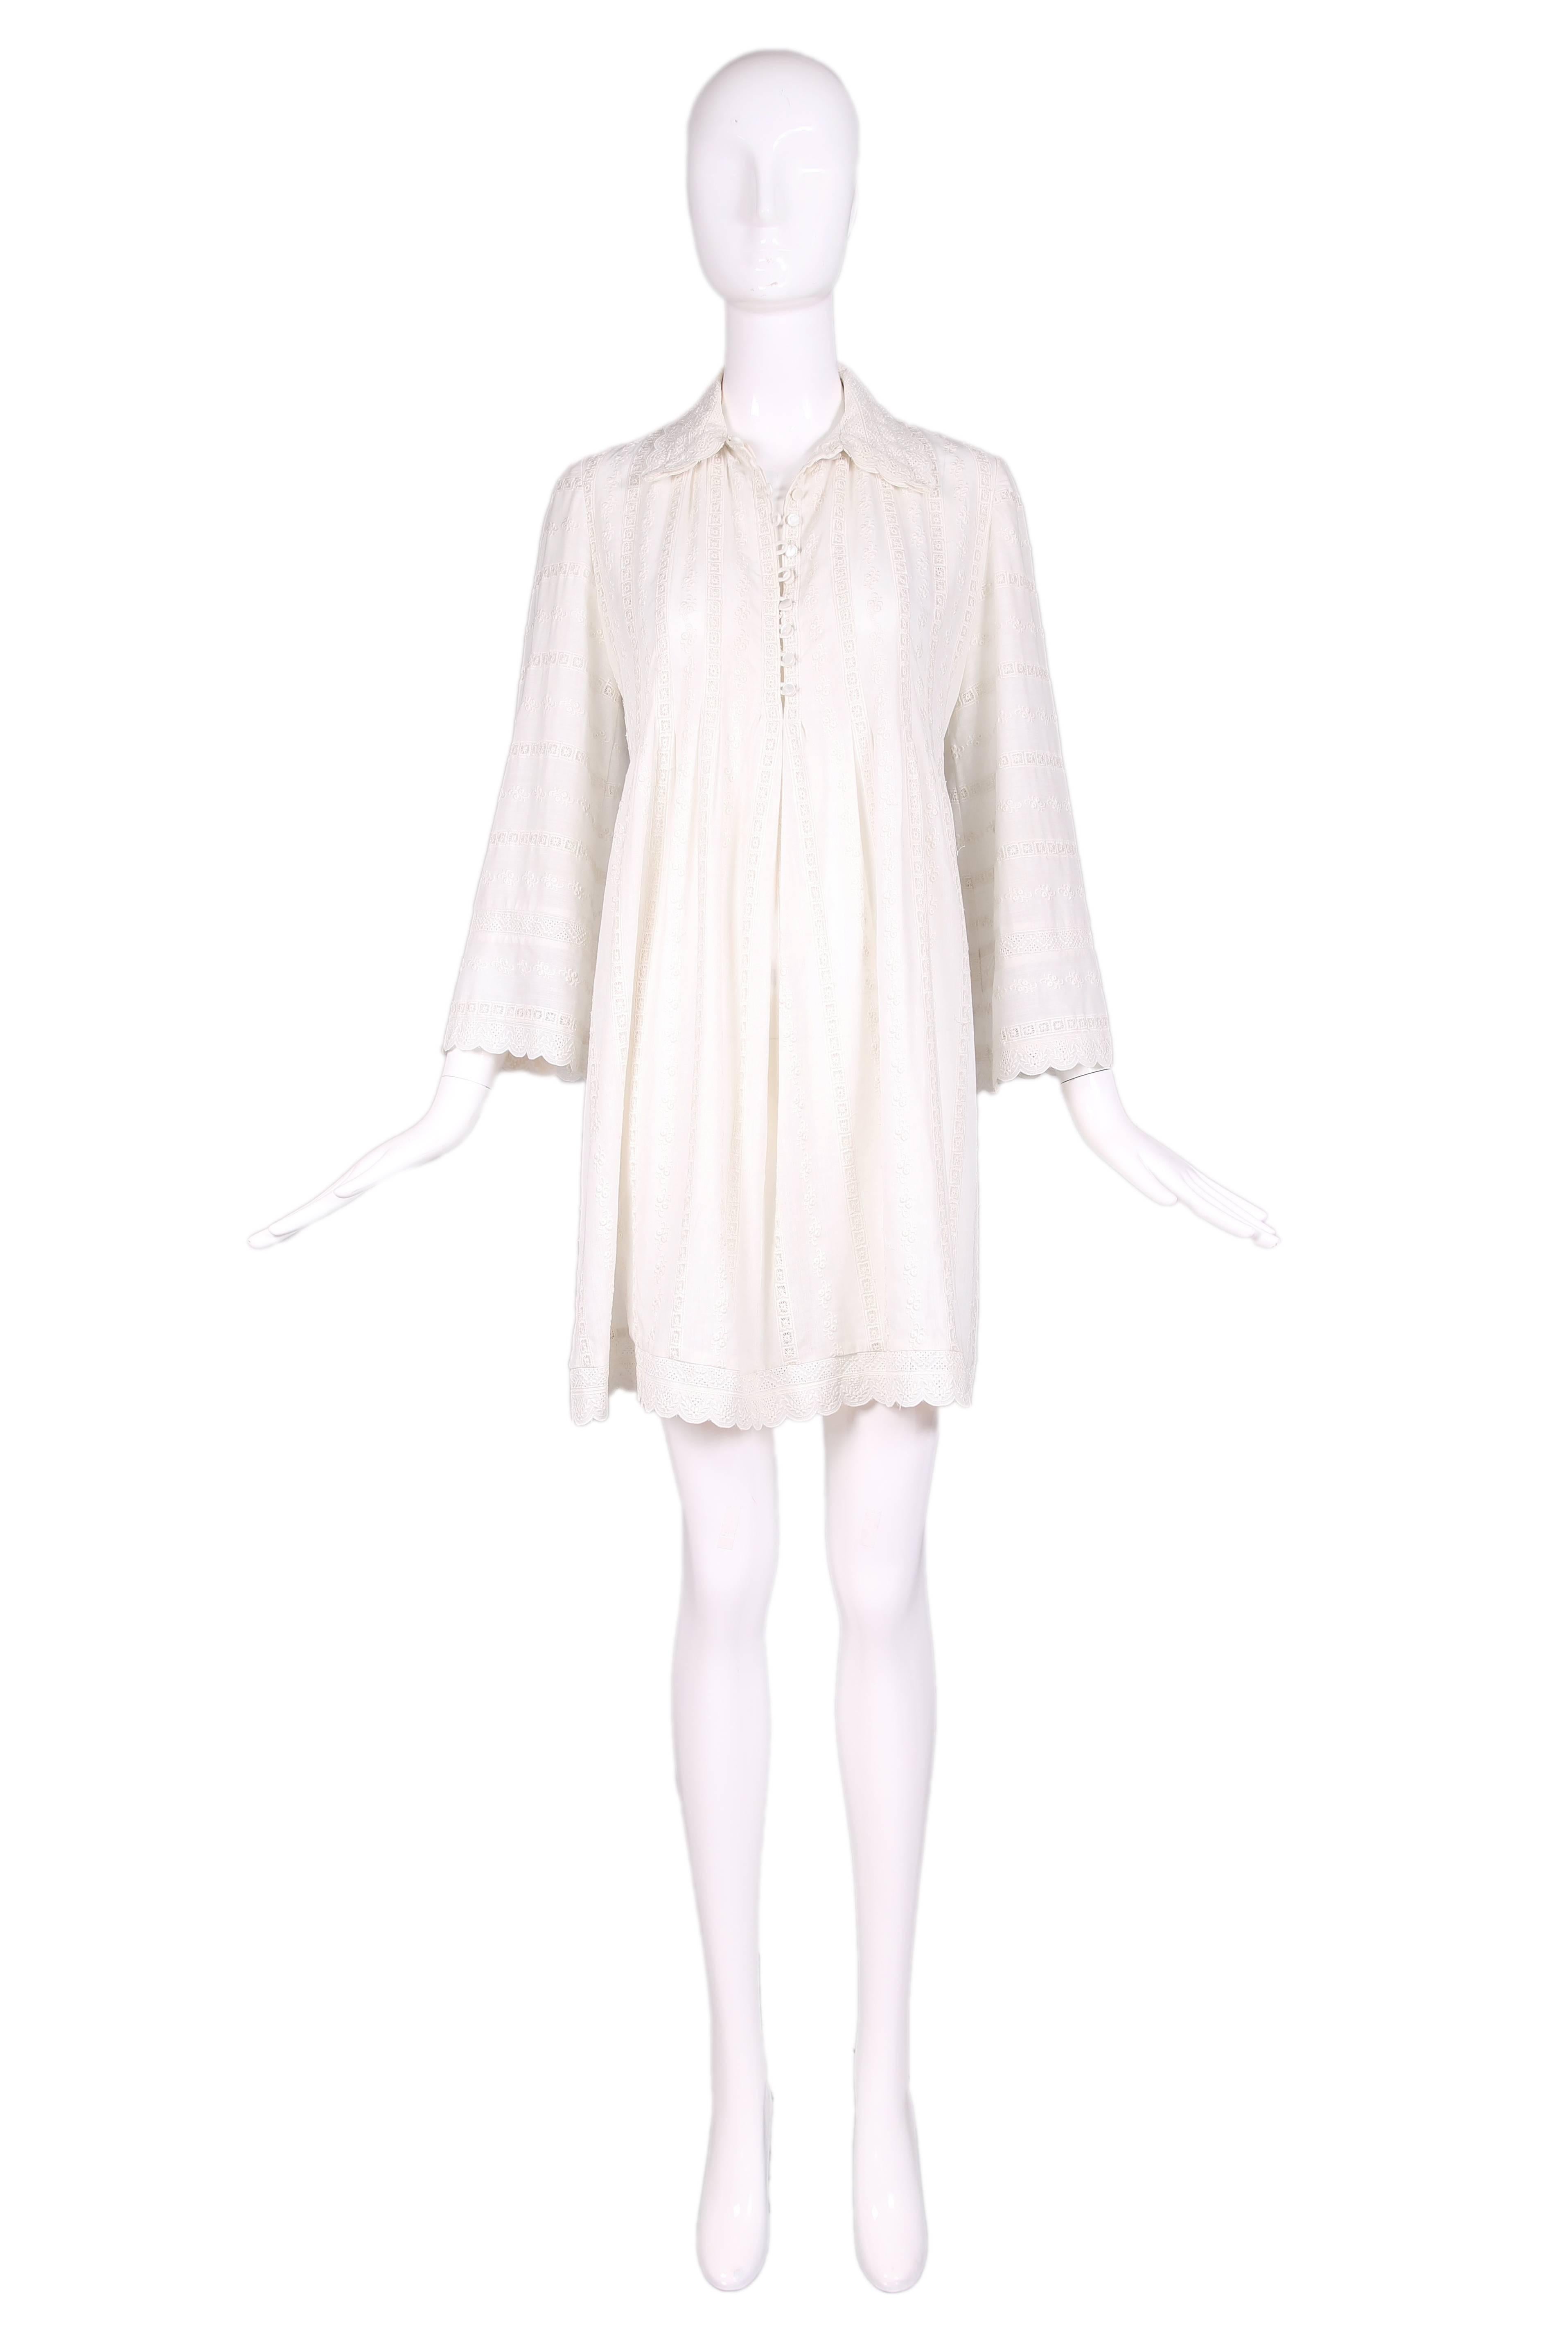 Vintage Giorgio Sant'Angelo creme cotton broderie anglaise babydoll dress with subtle bell sleeves, scalloped hem, and pearlized button closure. In excellent condition. No size tag, please consult measurements.
MEASUREMENTS:
Bust - 38